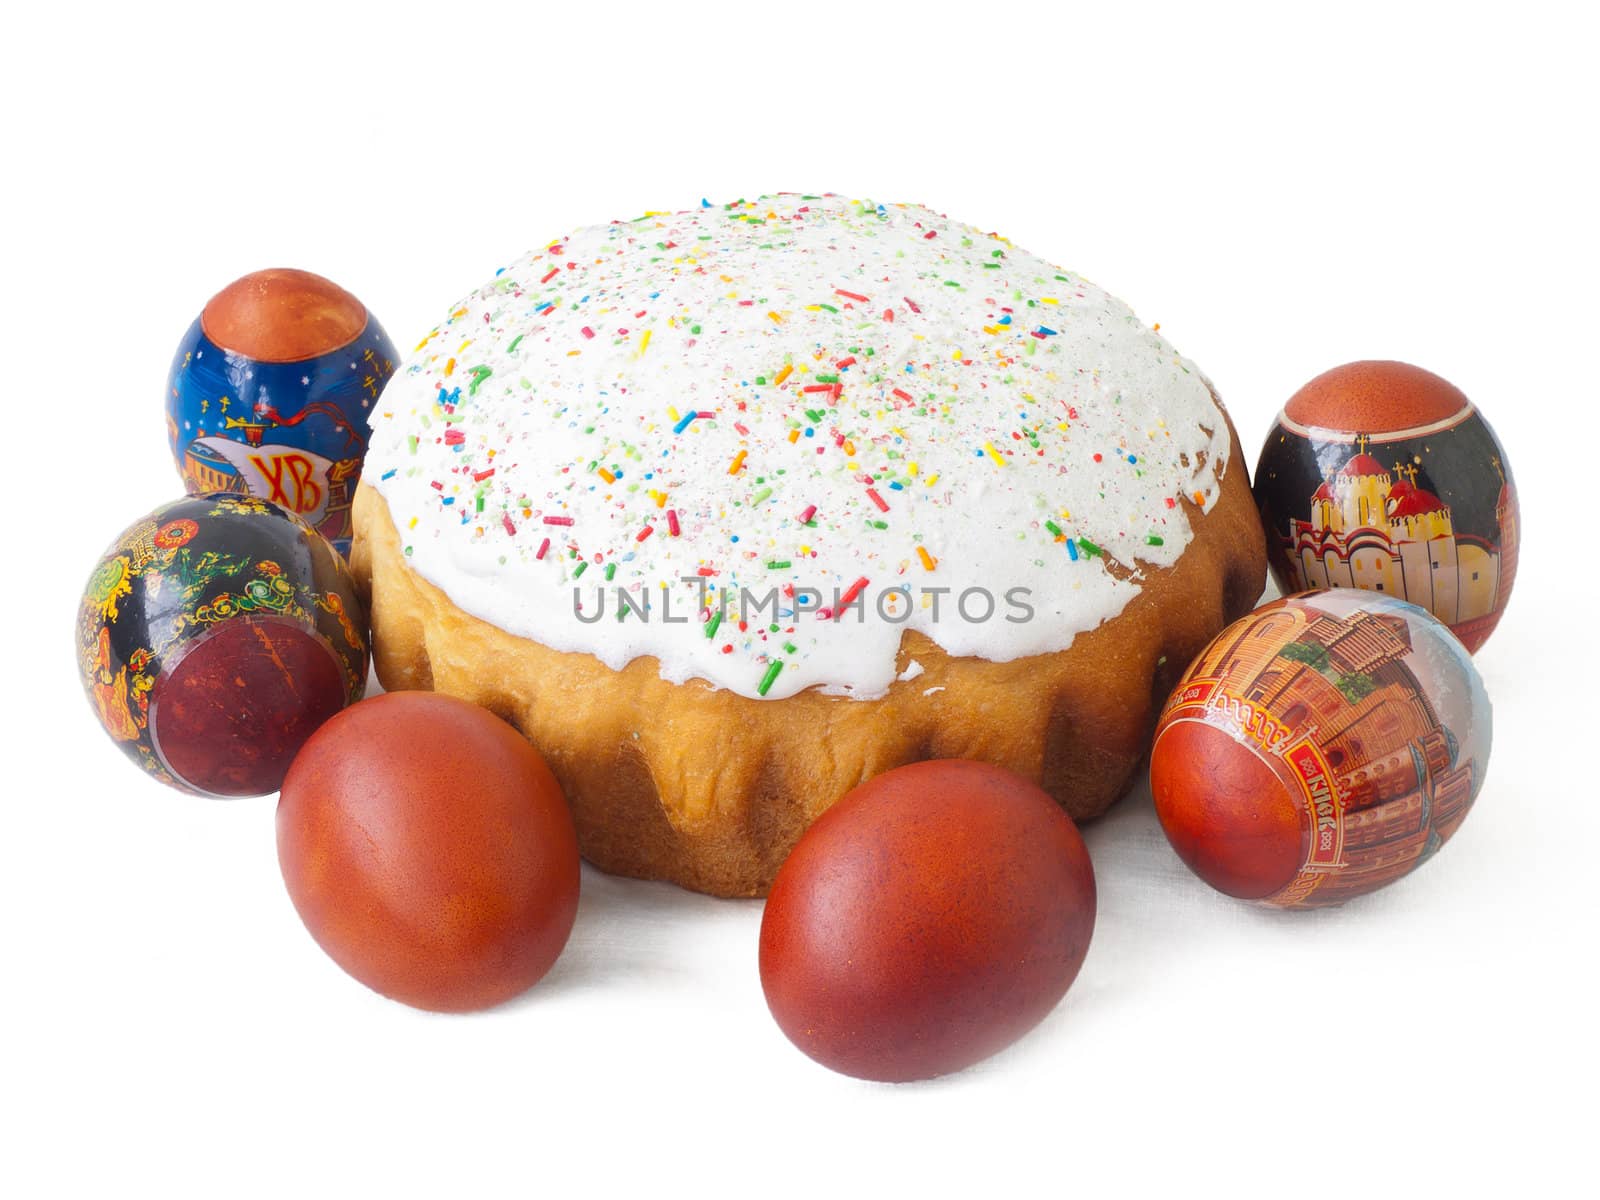 Eggs around easter cake by AlexDobysh